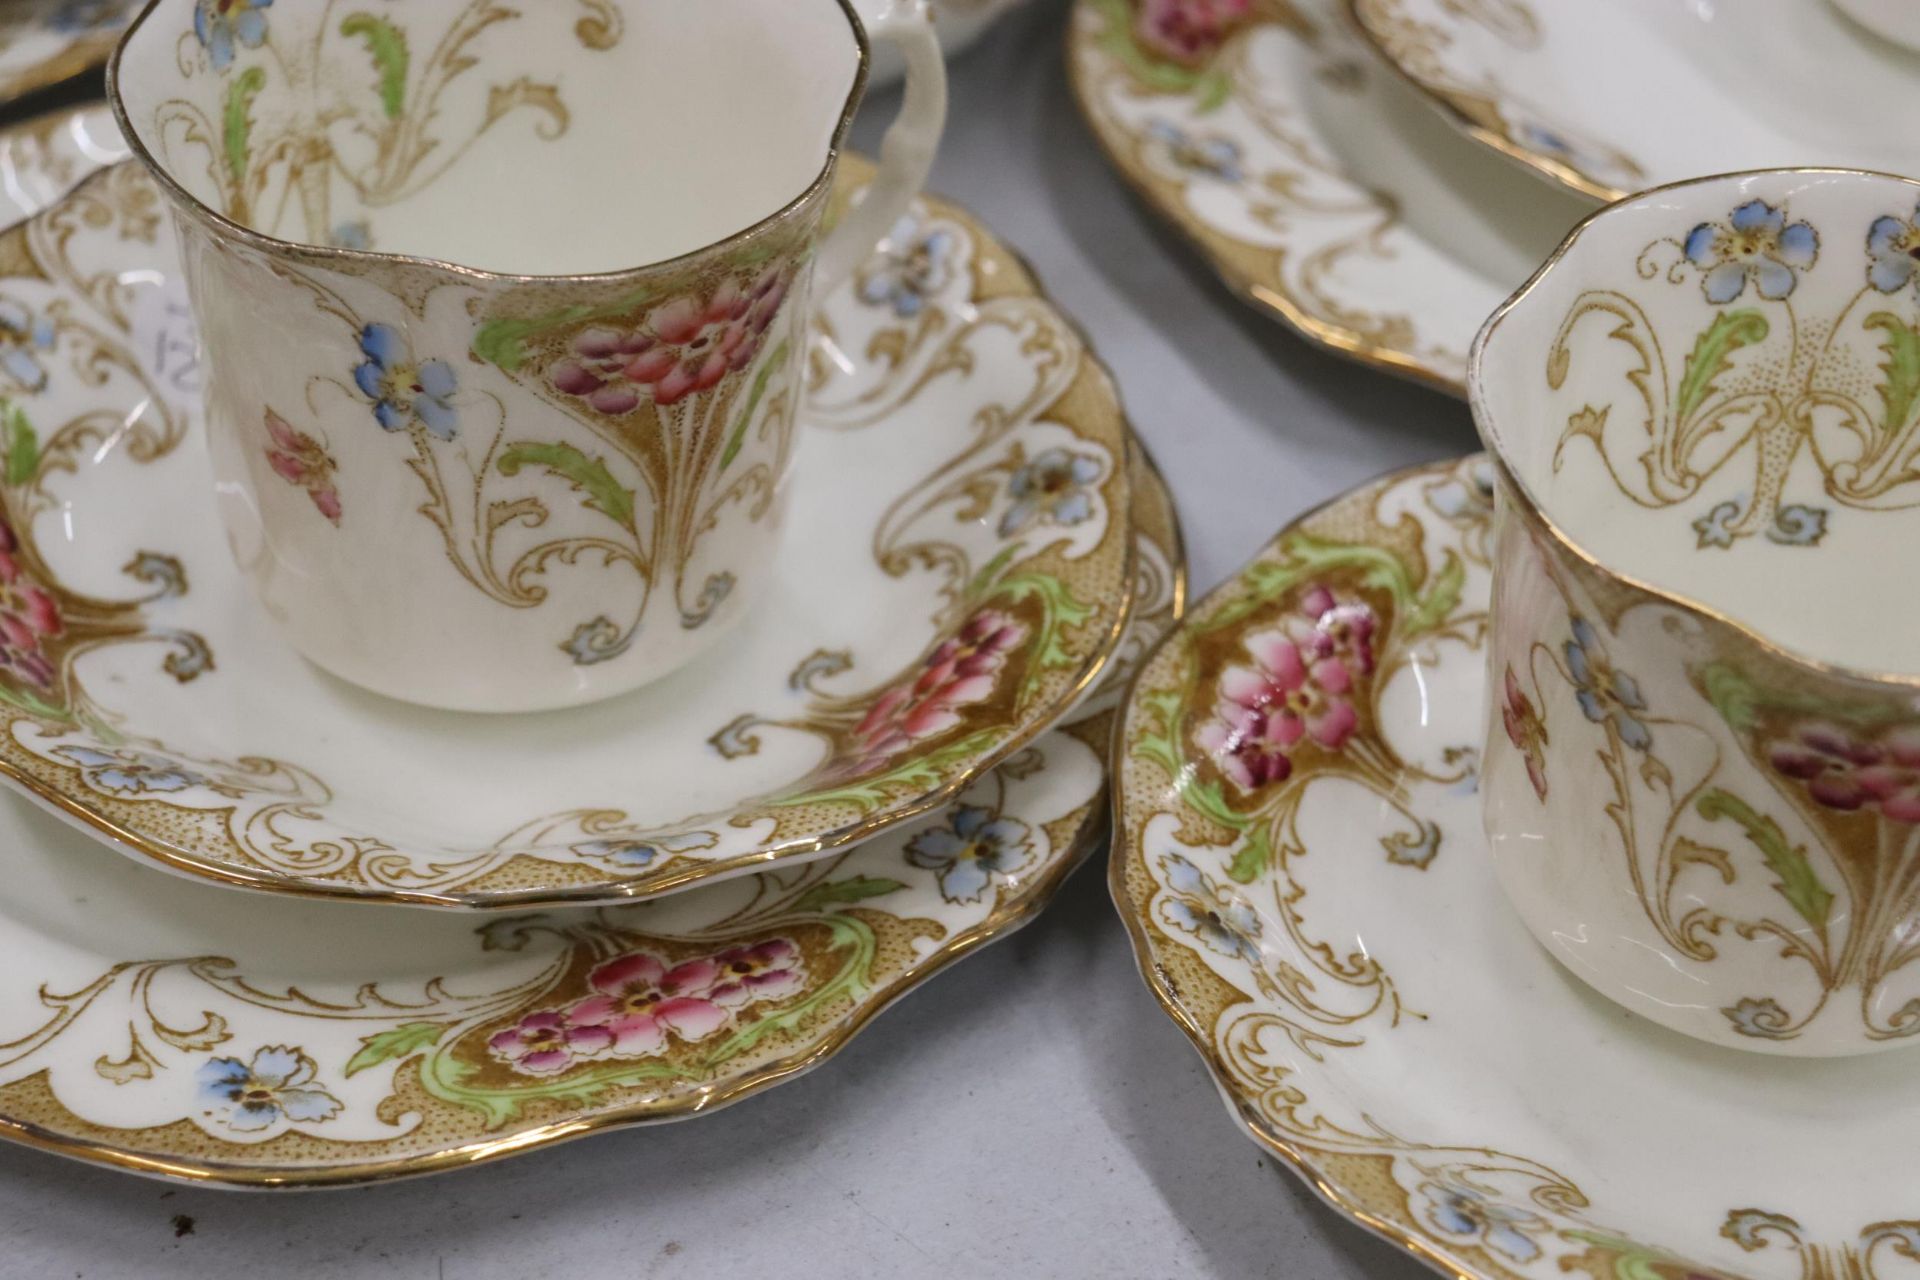 A LATE 18TH/EARLY 19TH CENTURY TEASET BY FRED B PEARCE & CO, LONDON, TO INCLUDE CAKE PLATES, A CREAM - Image 3 of 10